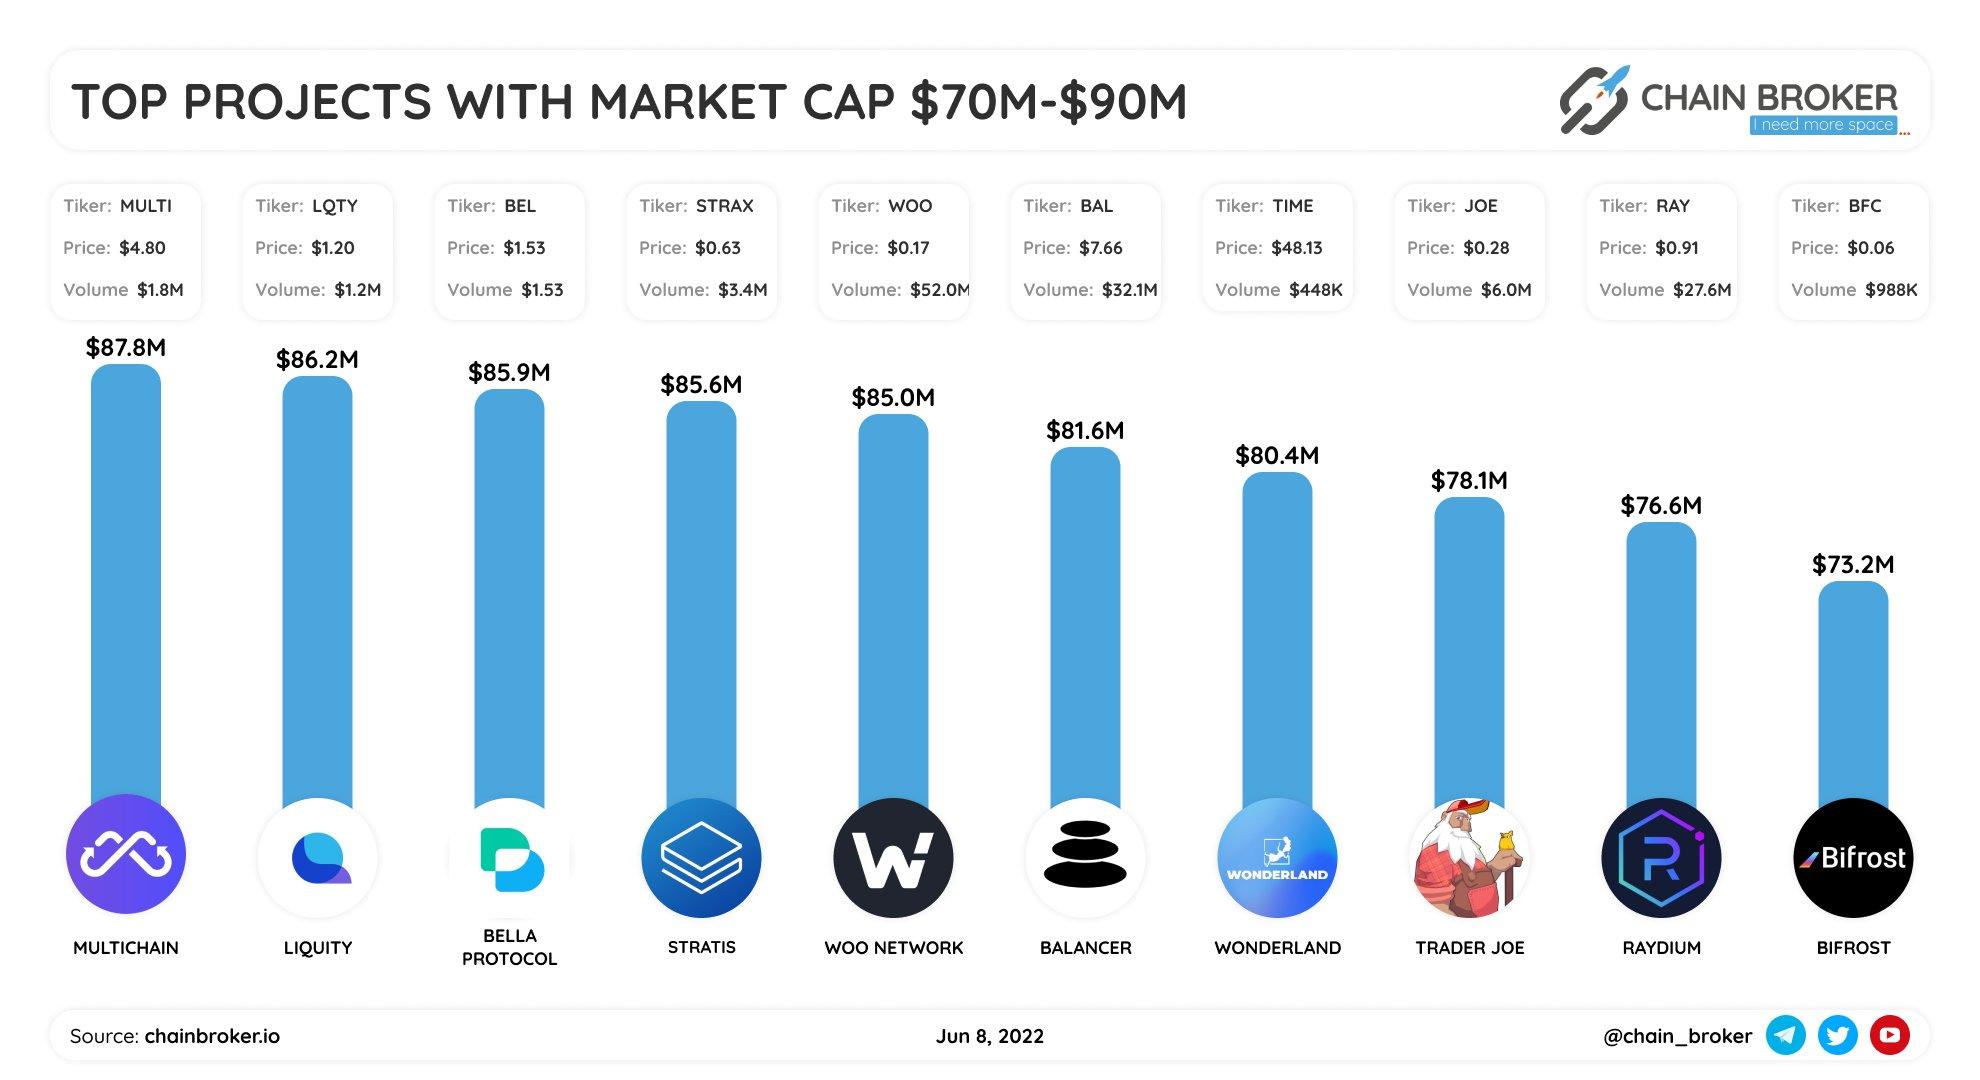 Top projects with Market Cap $70M - $90M